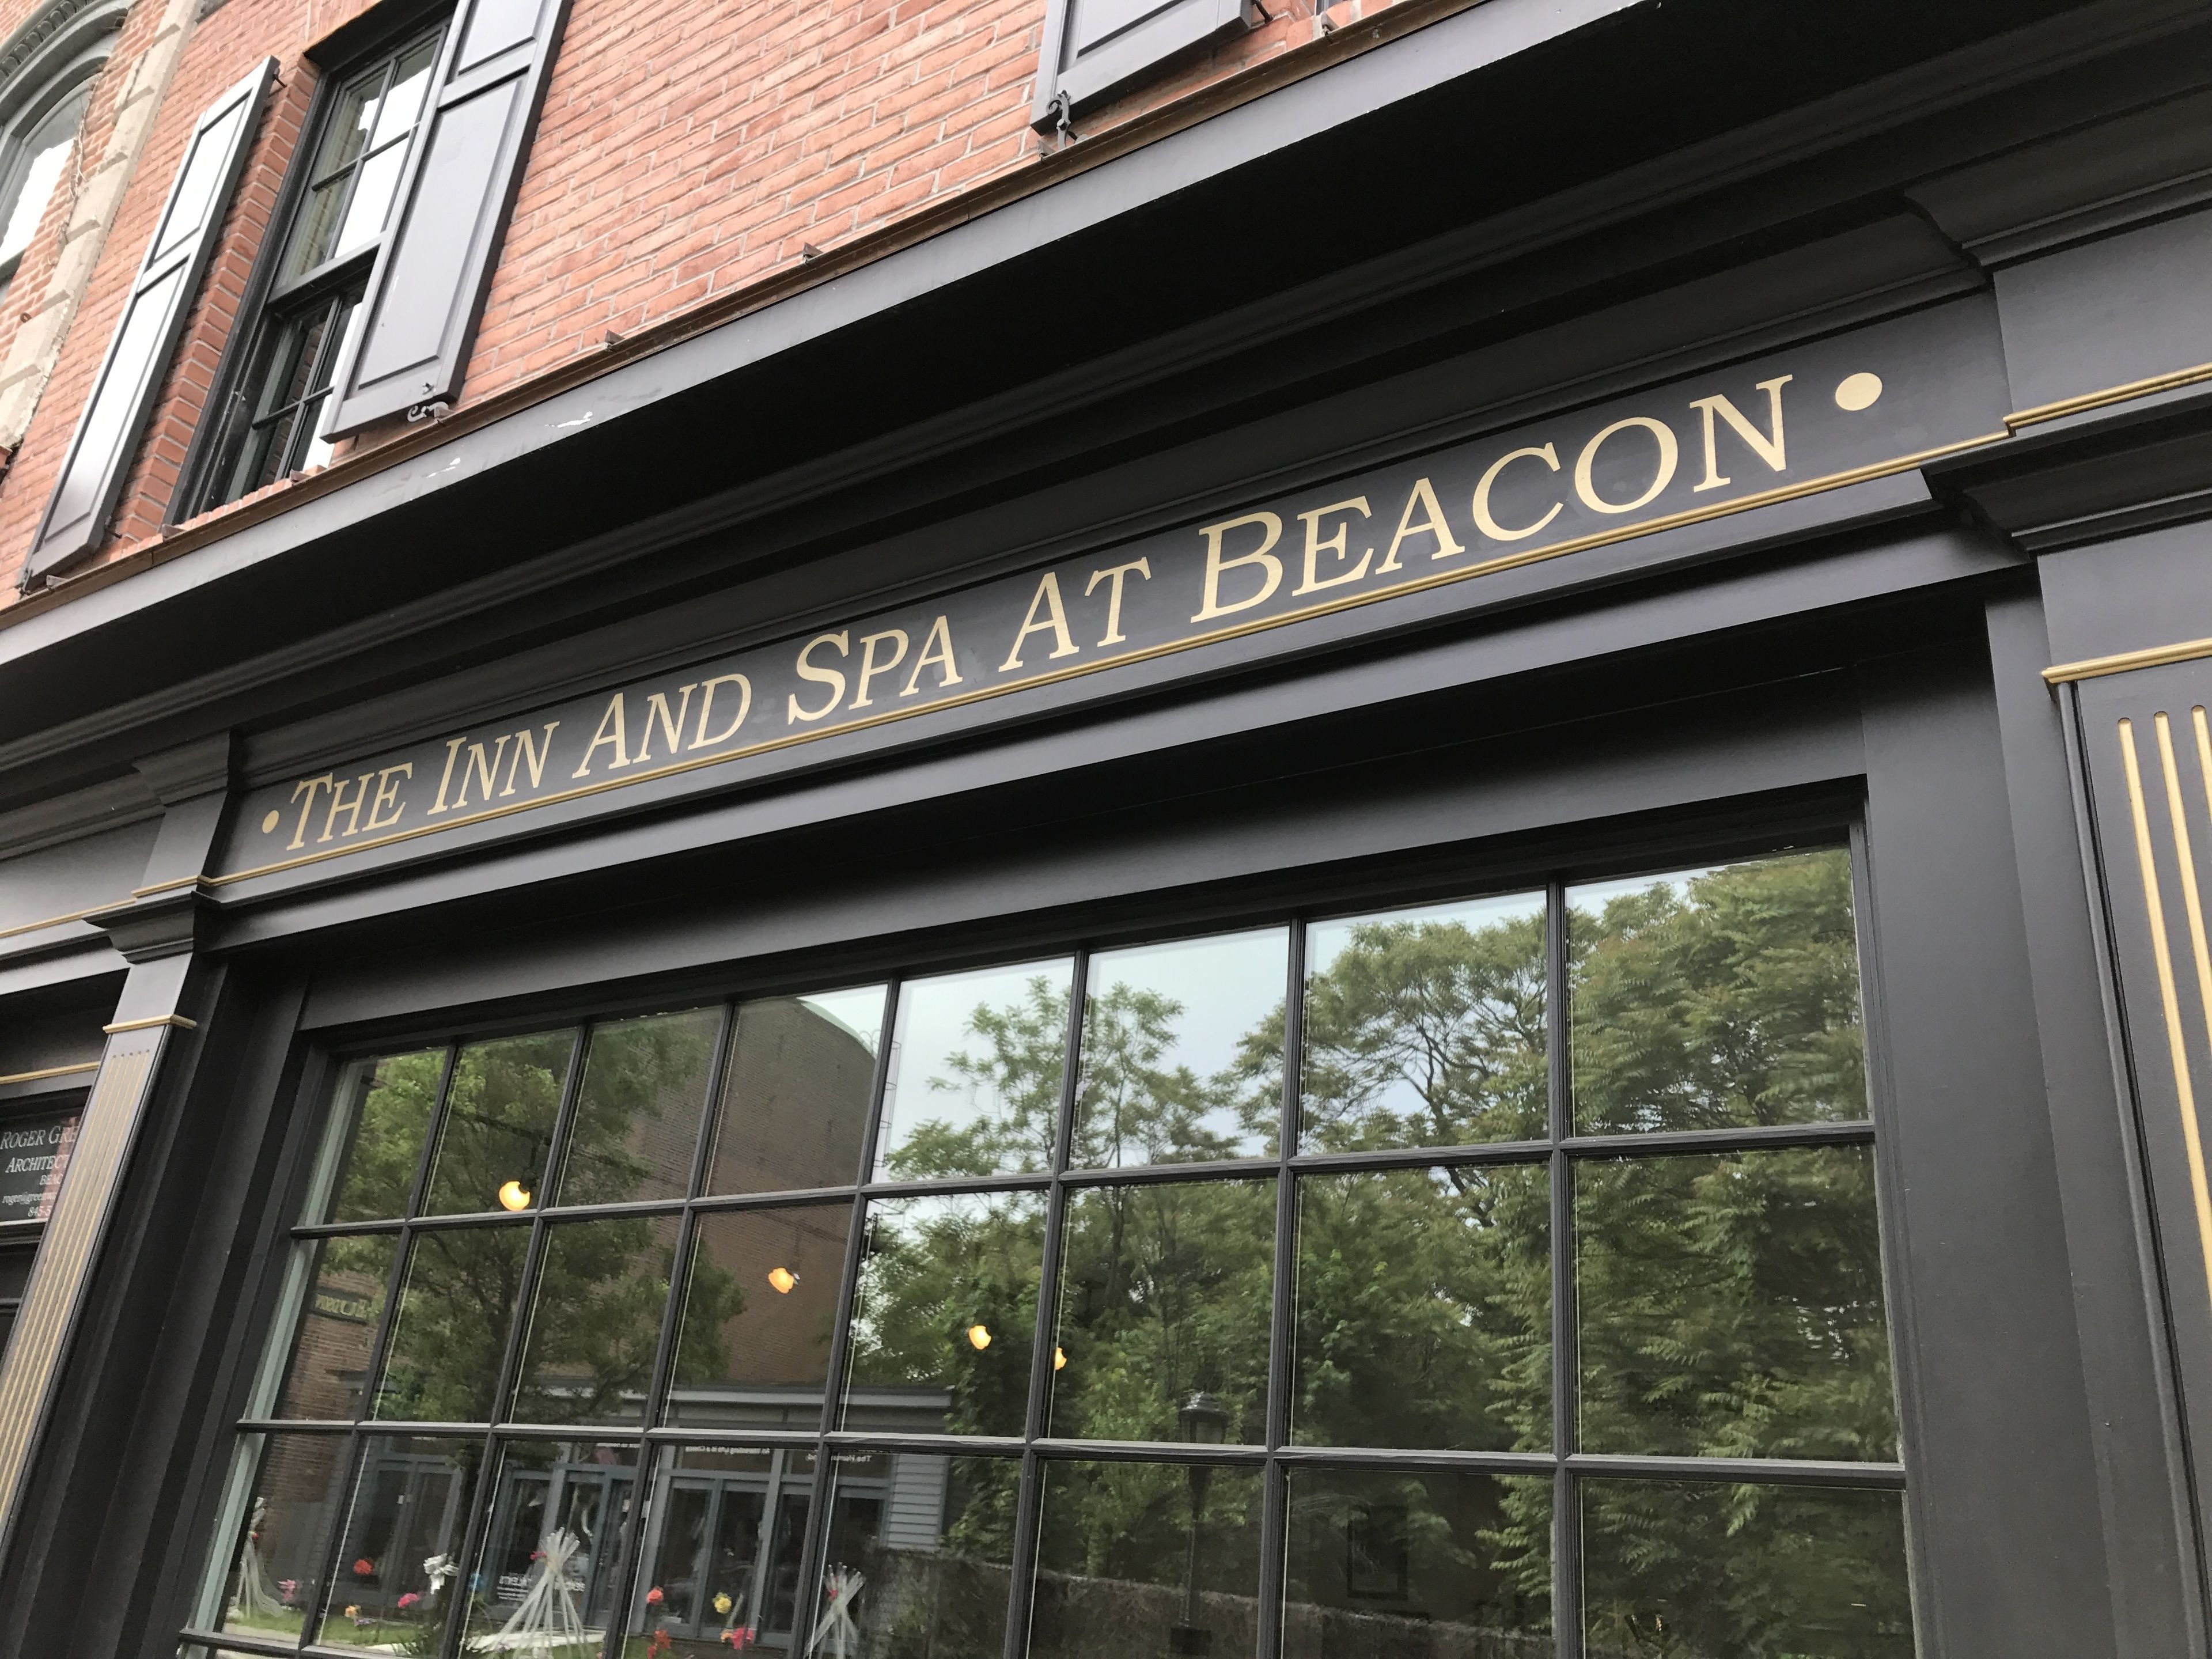 The Inn and Spa at Beacon